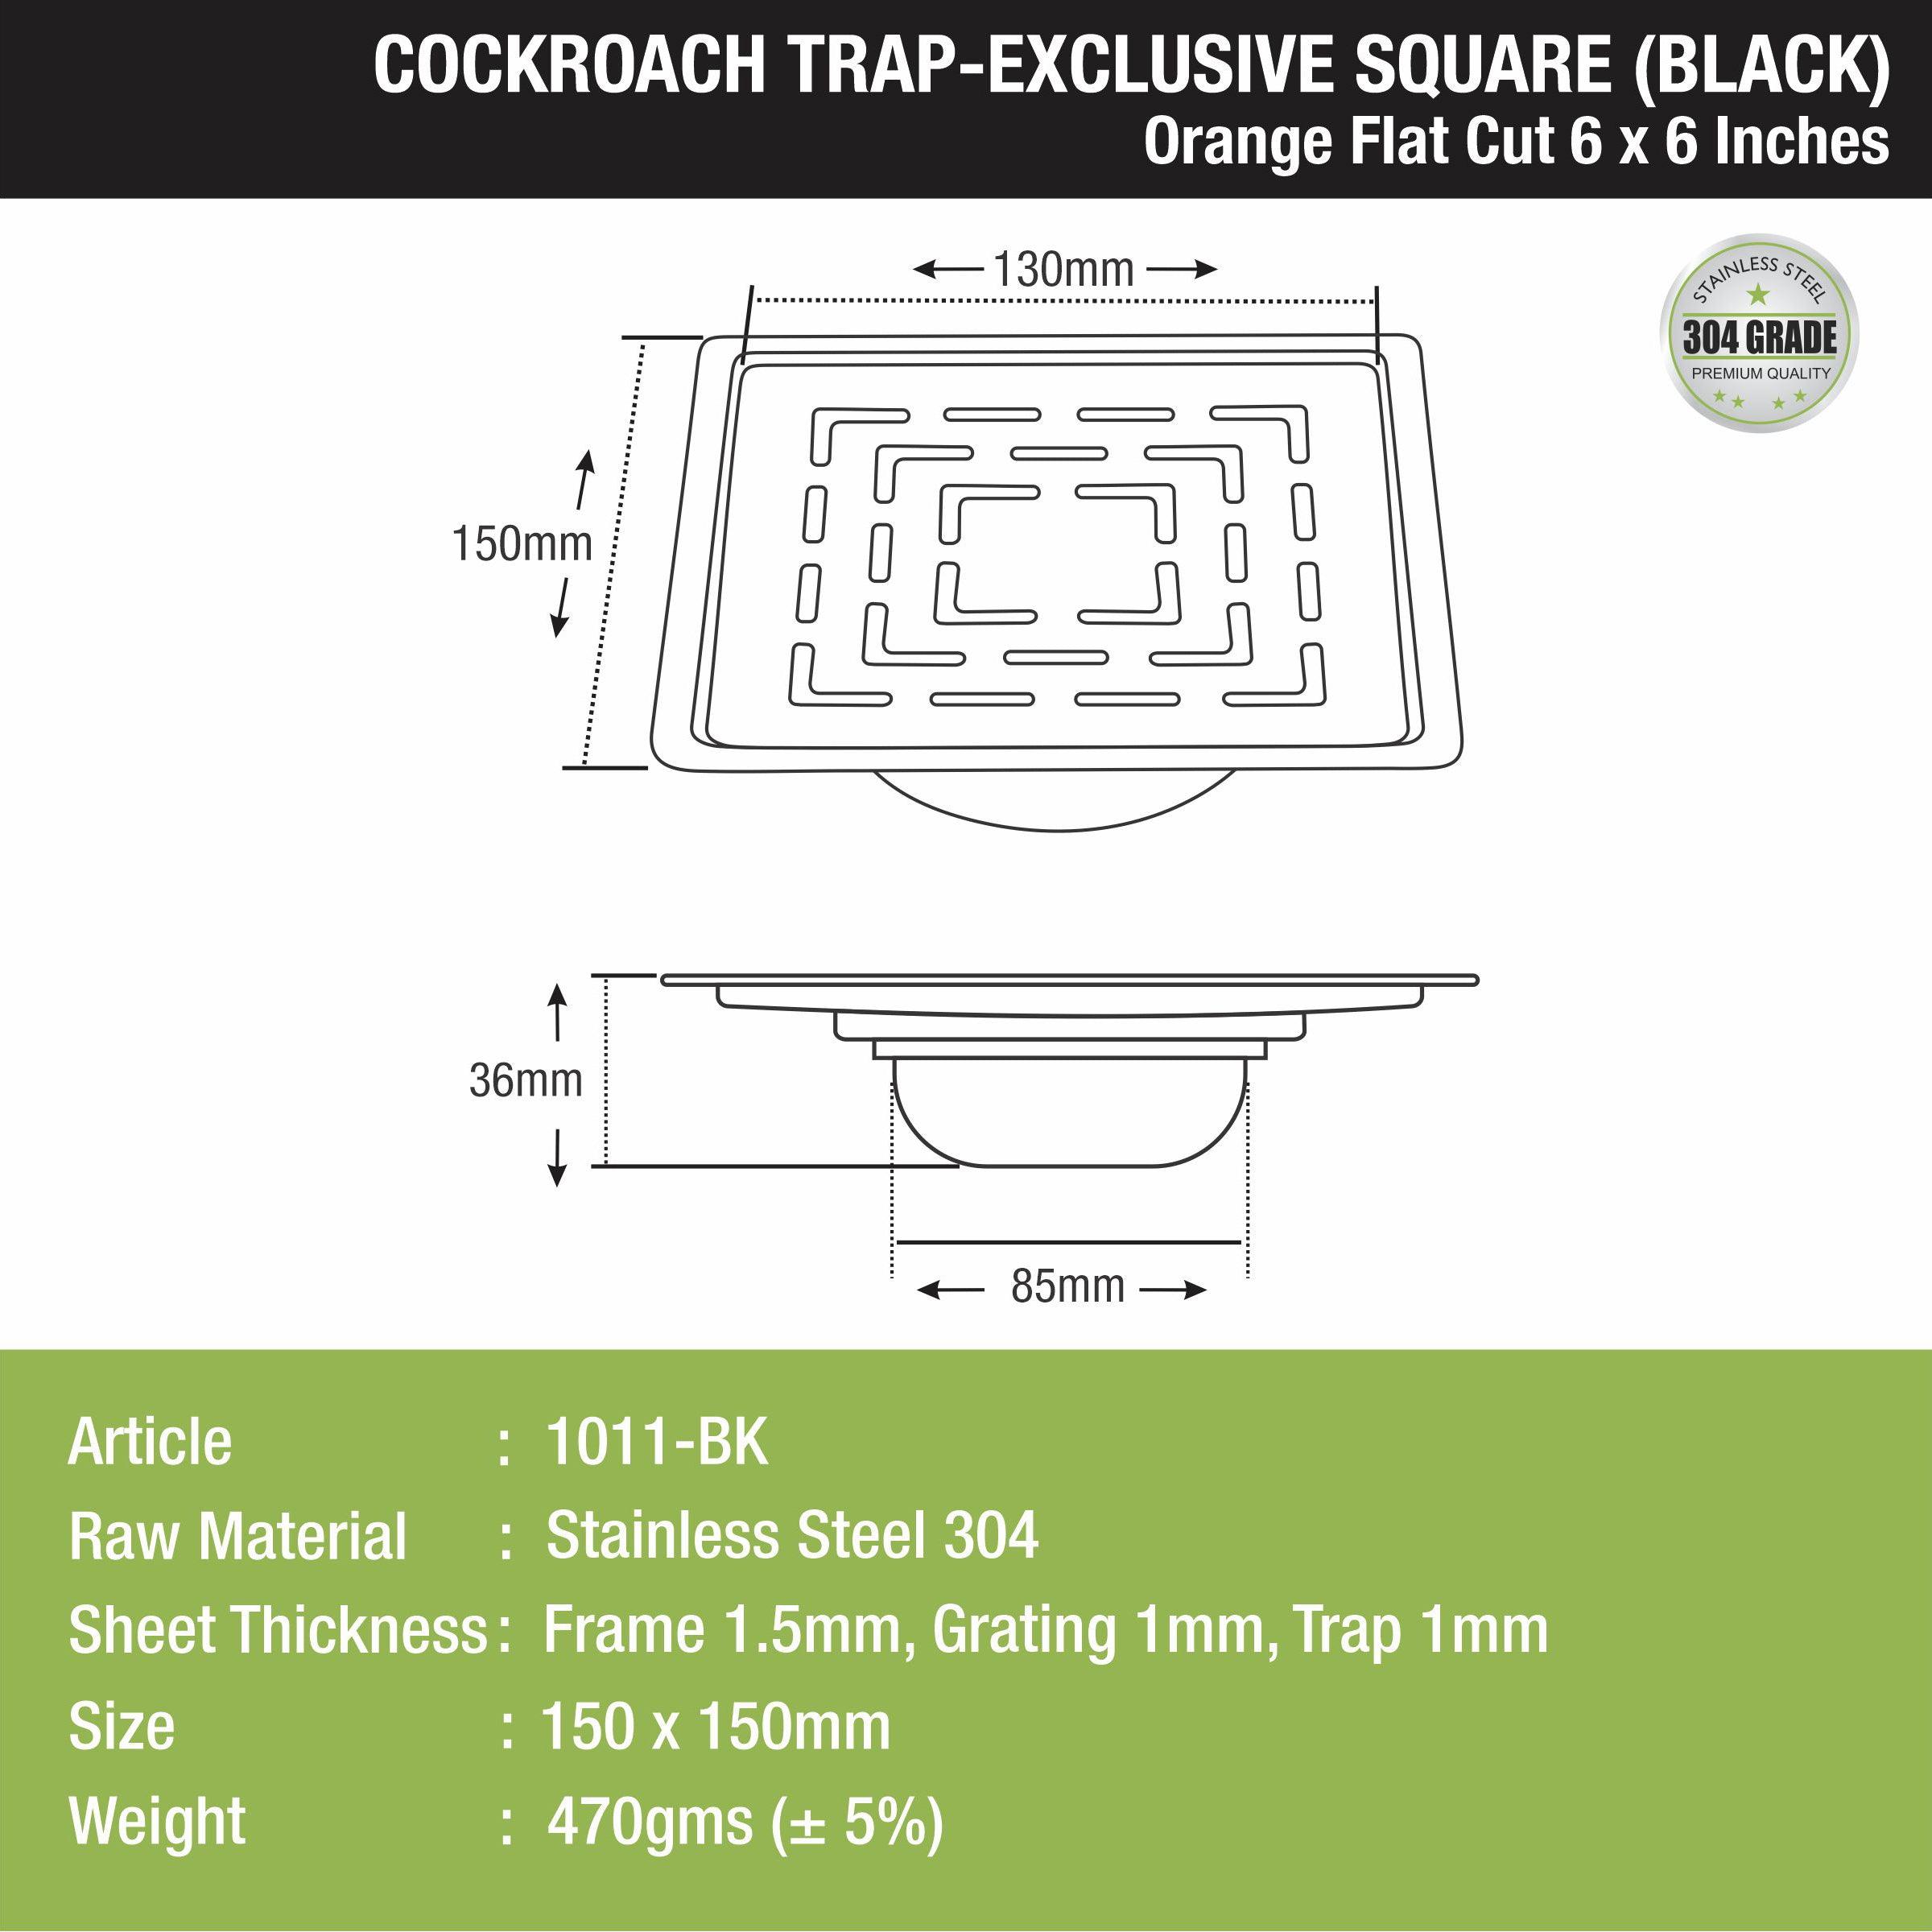 Orange Exclusive Square Flat Cut Floor Drain in Black PVD Coating (6 x 6 Inches) with Cockroach Trap  size and measurement